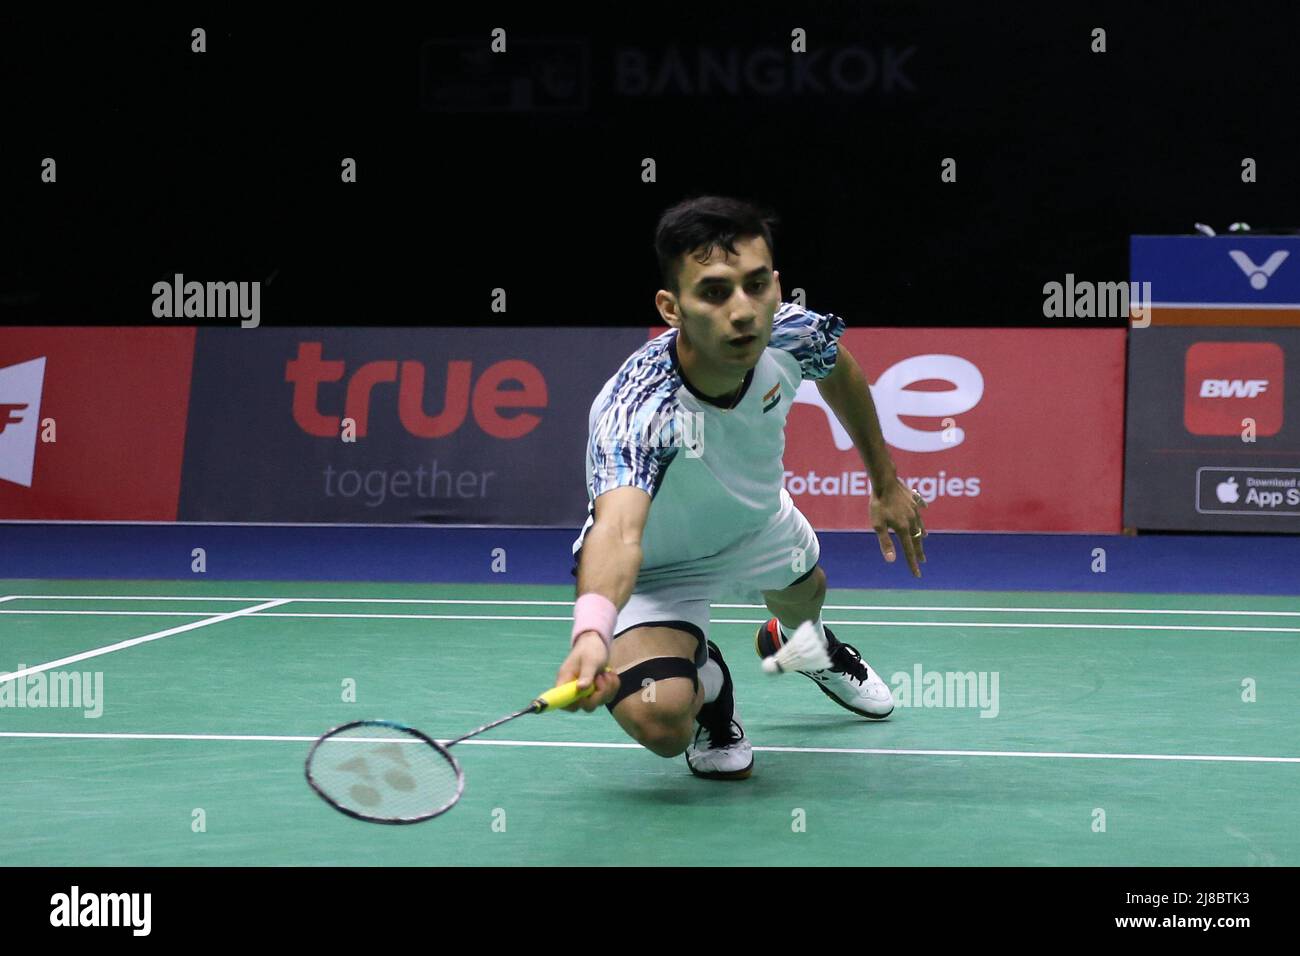 220515) -- BANGKOK, May 15, 2022 (Xinhua) -- Lakshya Sen of India competes in the singles match against Anthony Sinisuka Ginting of Indonesia during the final match at Thomas Cup badminton tournament